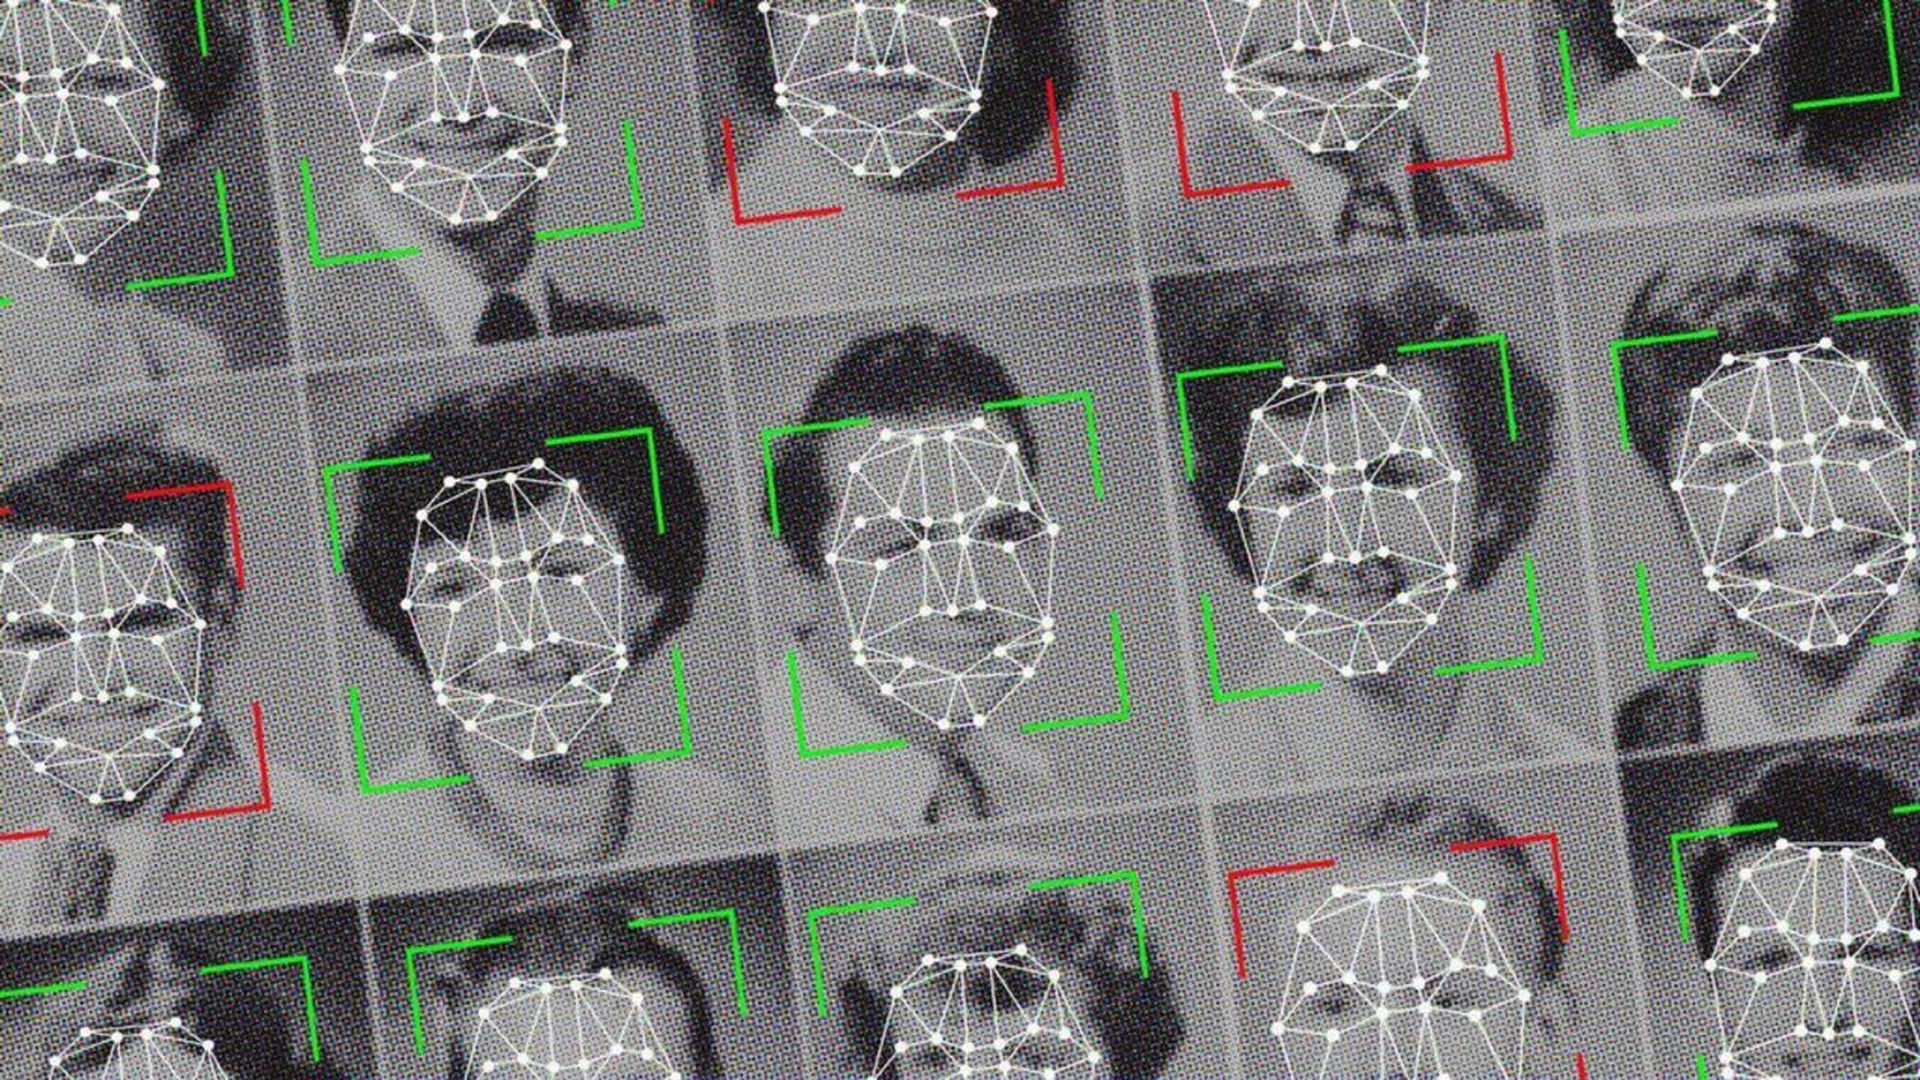 Illustration of a facial recognition system